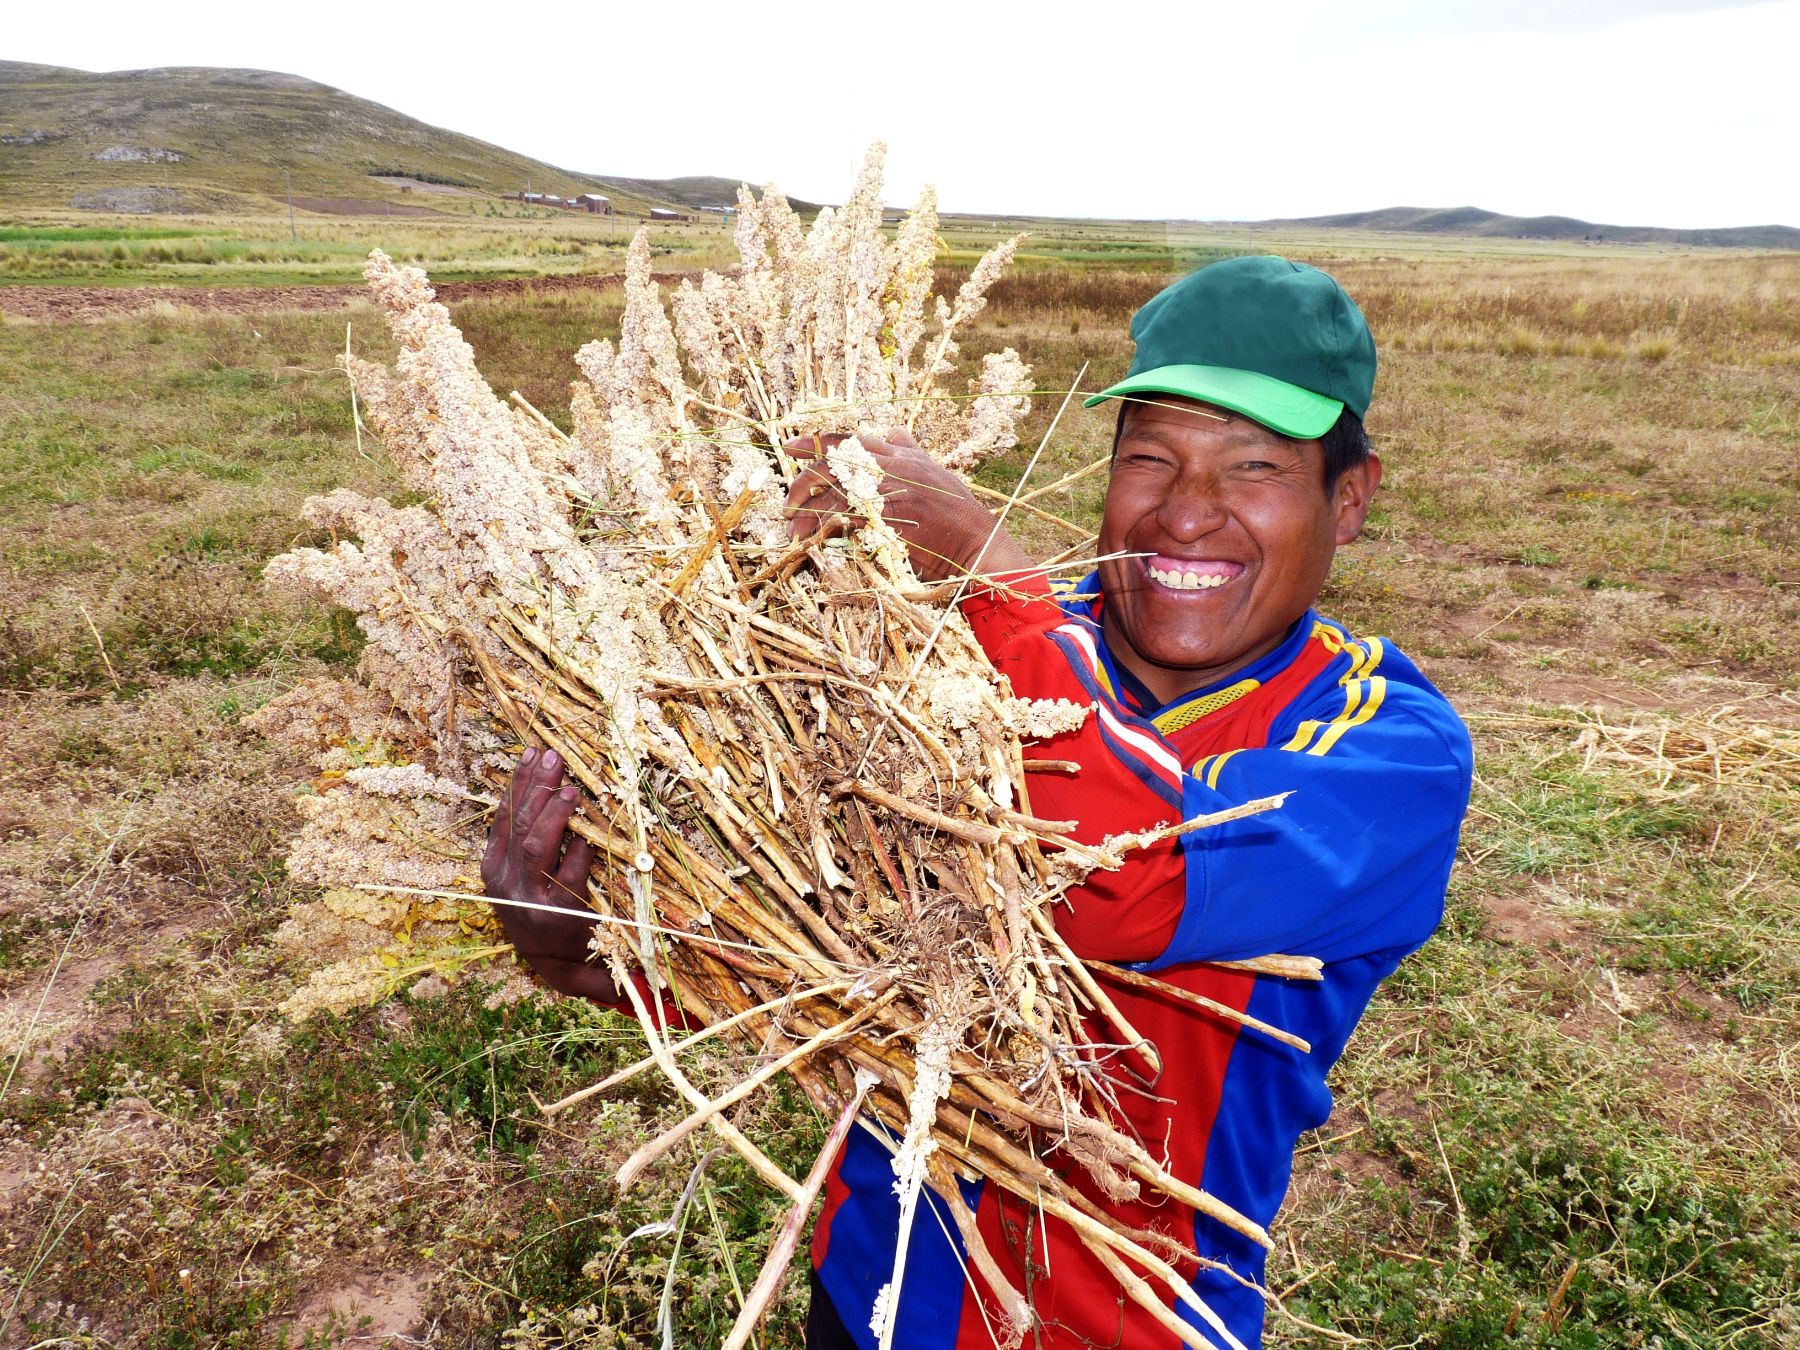 Quinoa grower from south-eastern Peru